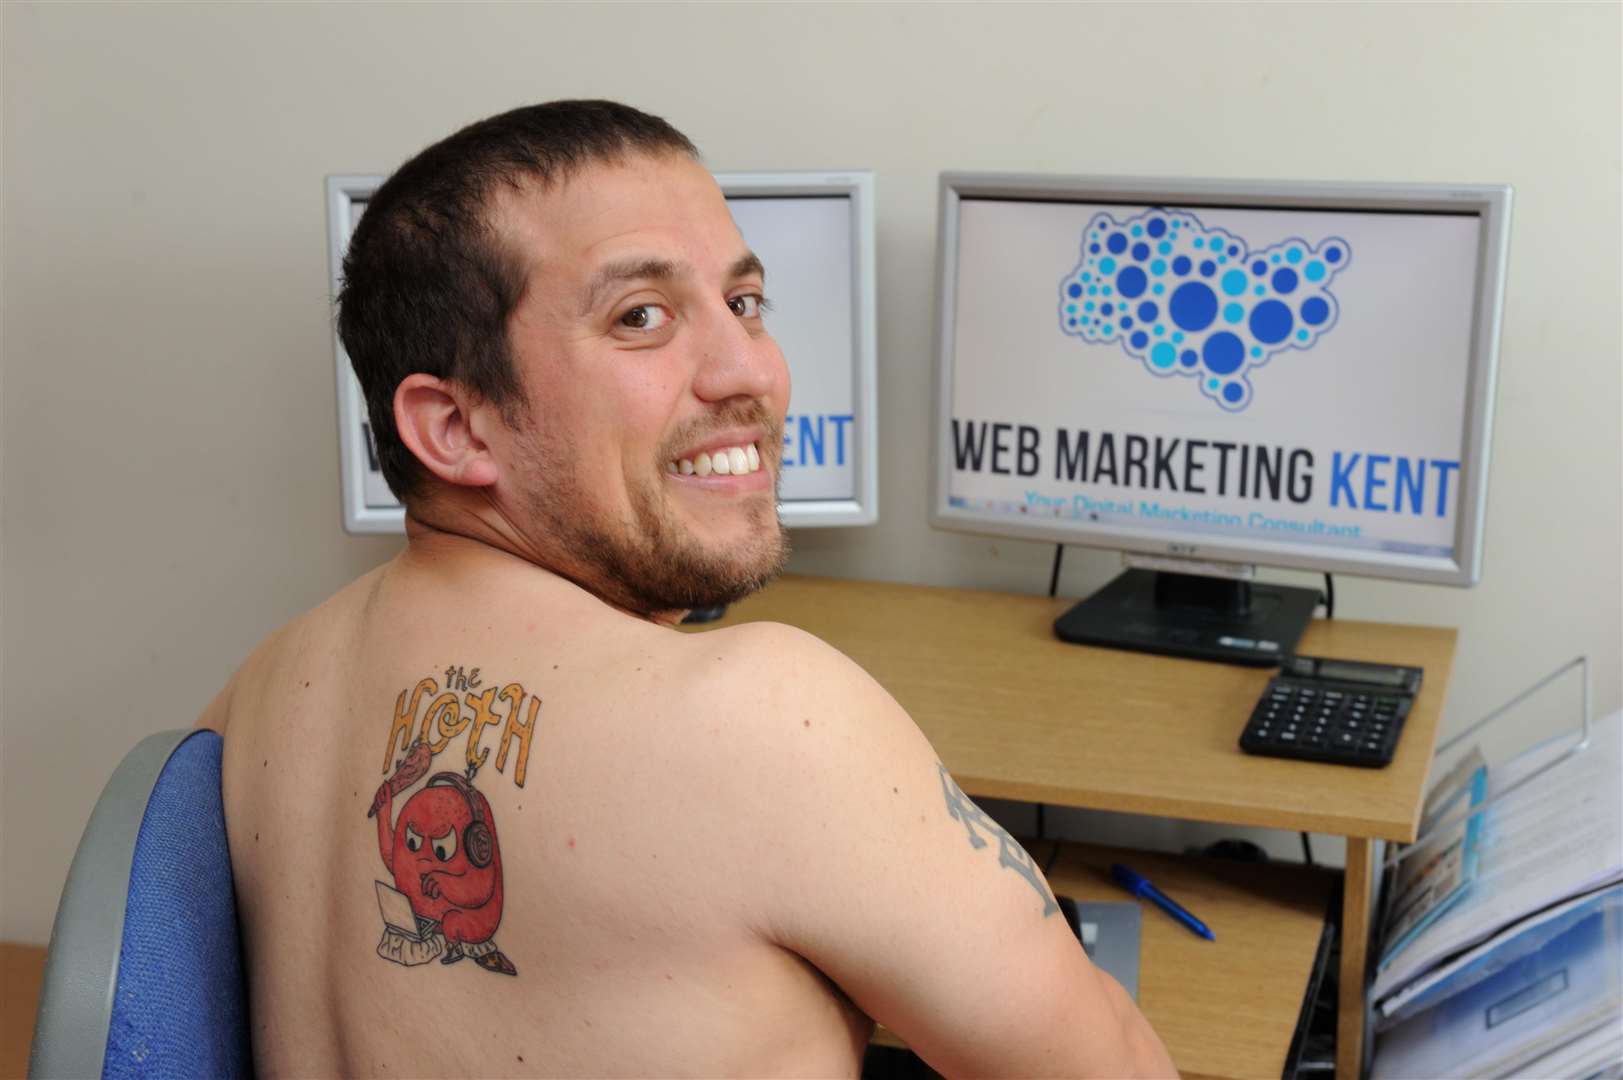 Andy Palmer got a company logo tattoo in order to get free web credits to use